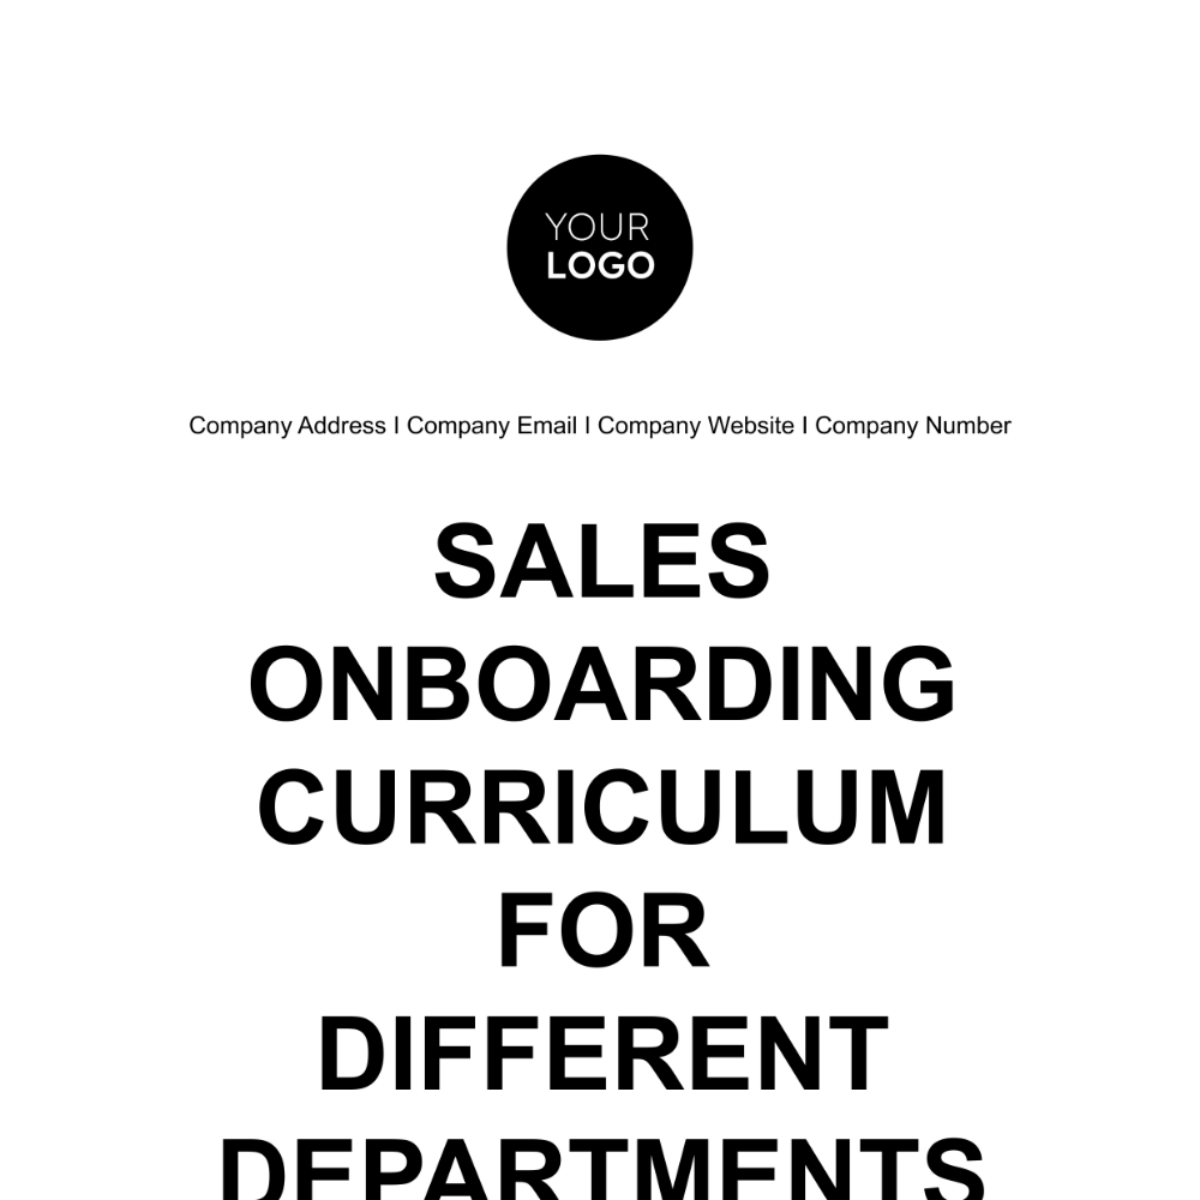 Sales Onboarding Curriculum for Different Departments Template